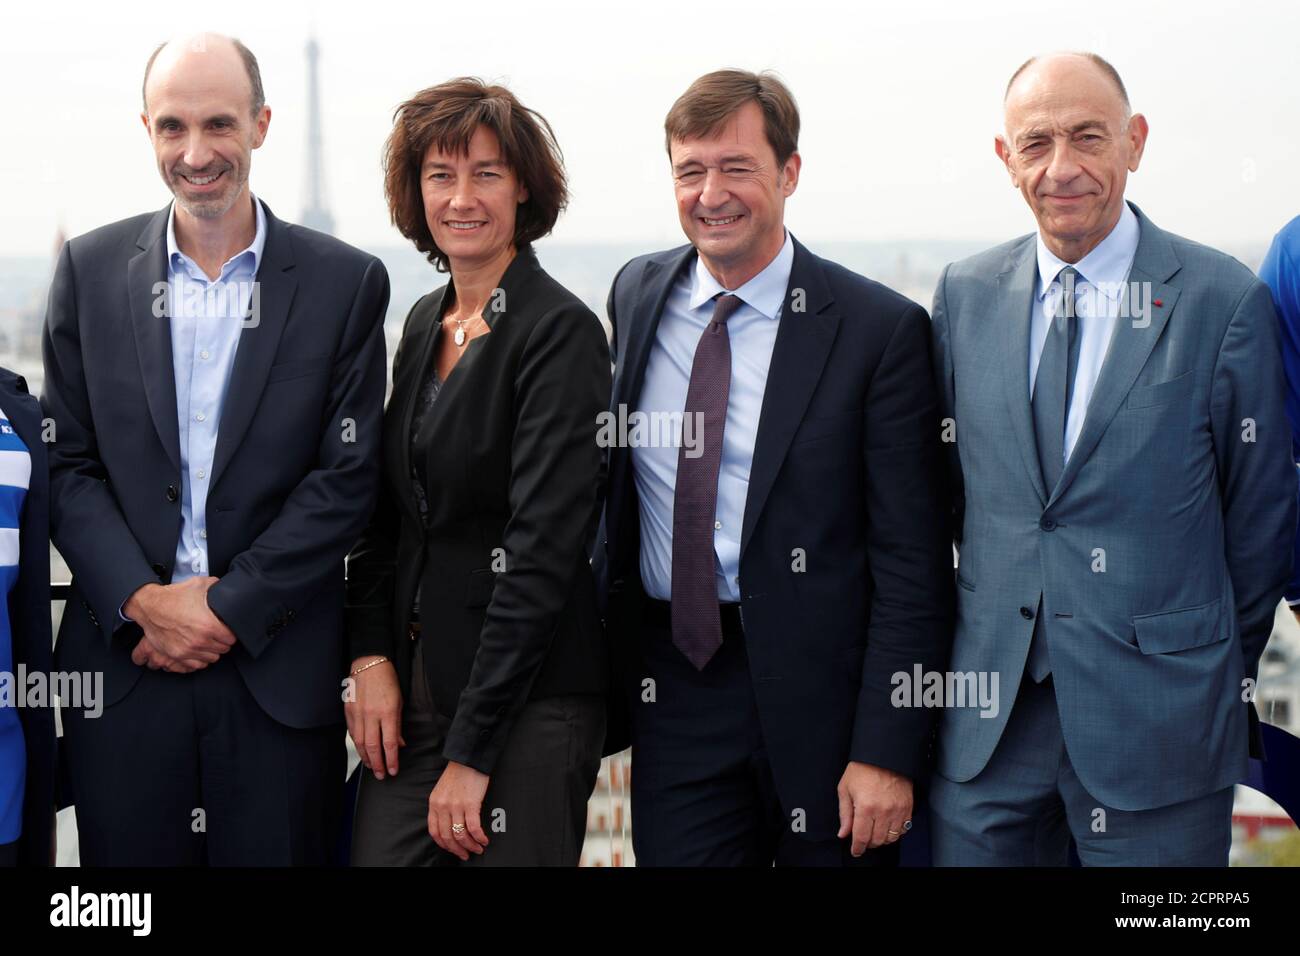 From L to R : Joon's CEO Jean-Michel Mathieu, Joon's Chief Operating  Officer Sophie Bordmann, Air France's General Director Franck Terner and  Jean-Marc Janaillac, Chairman and Chief Executive Officer of Air France-KLM